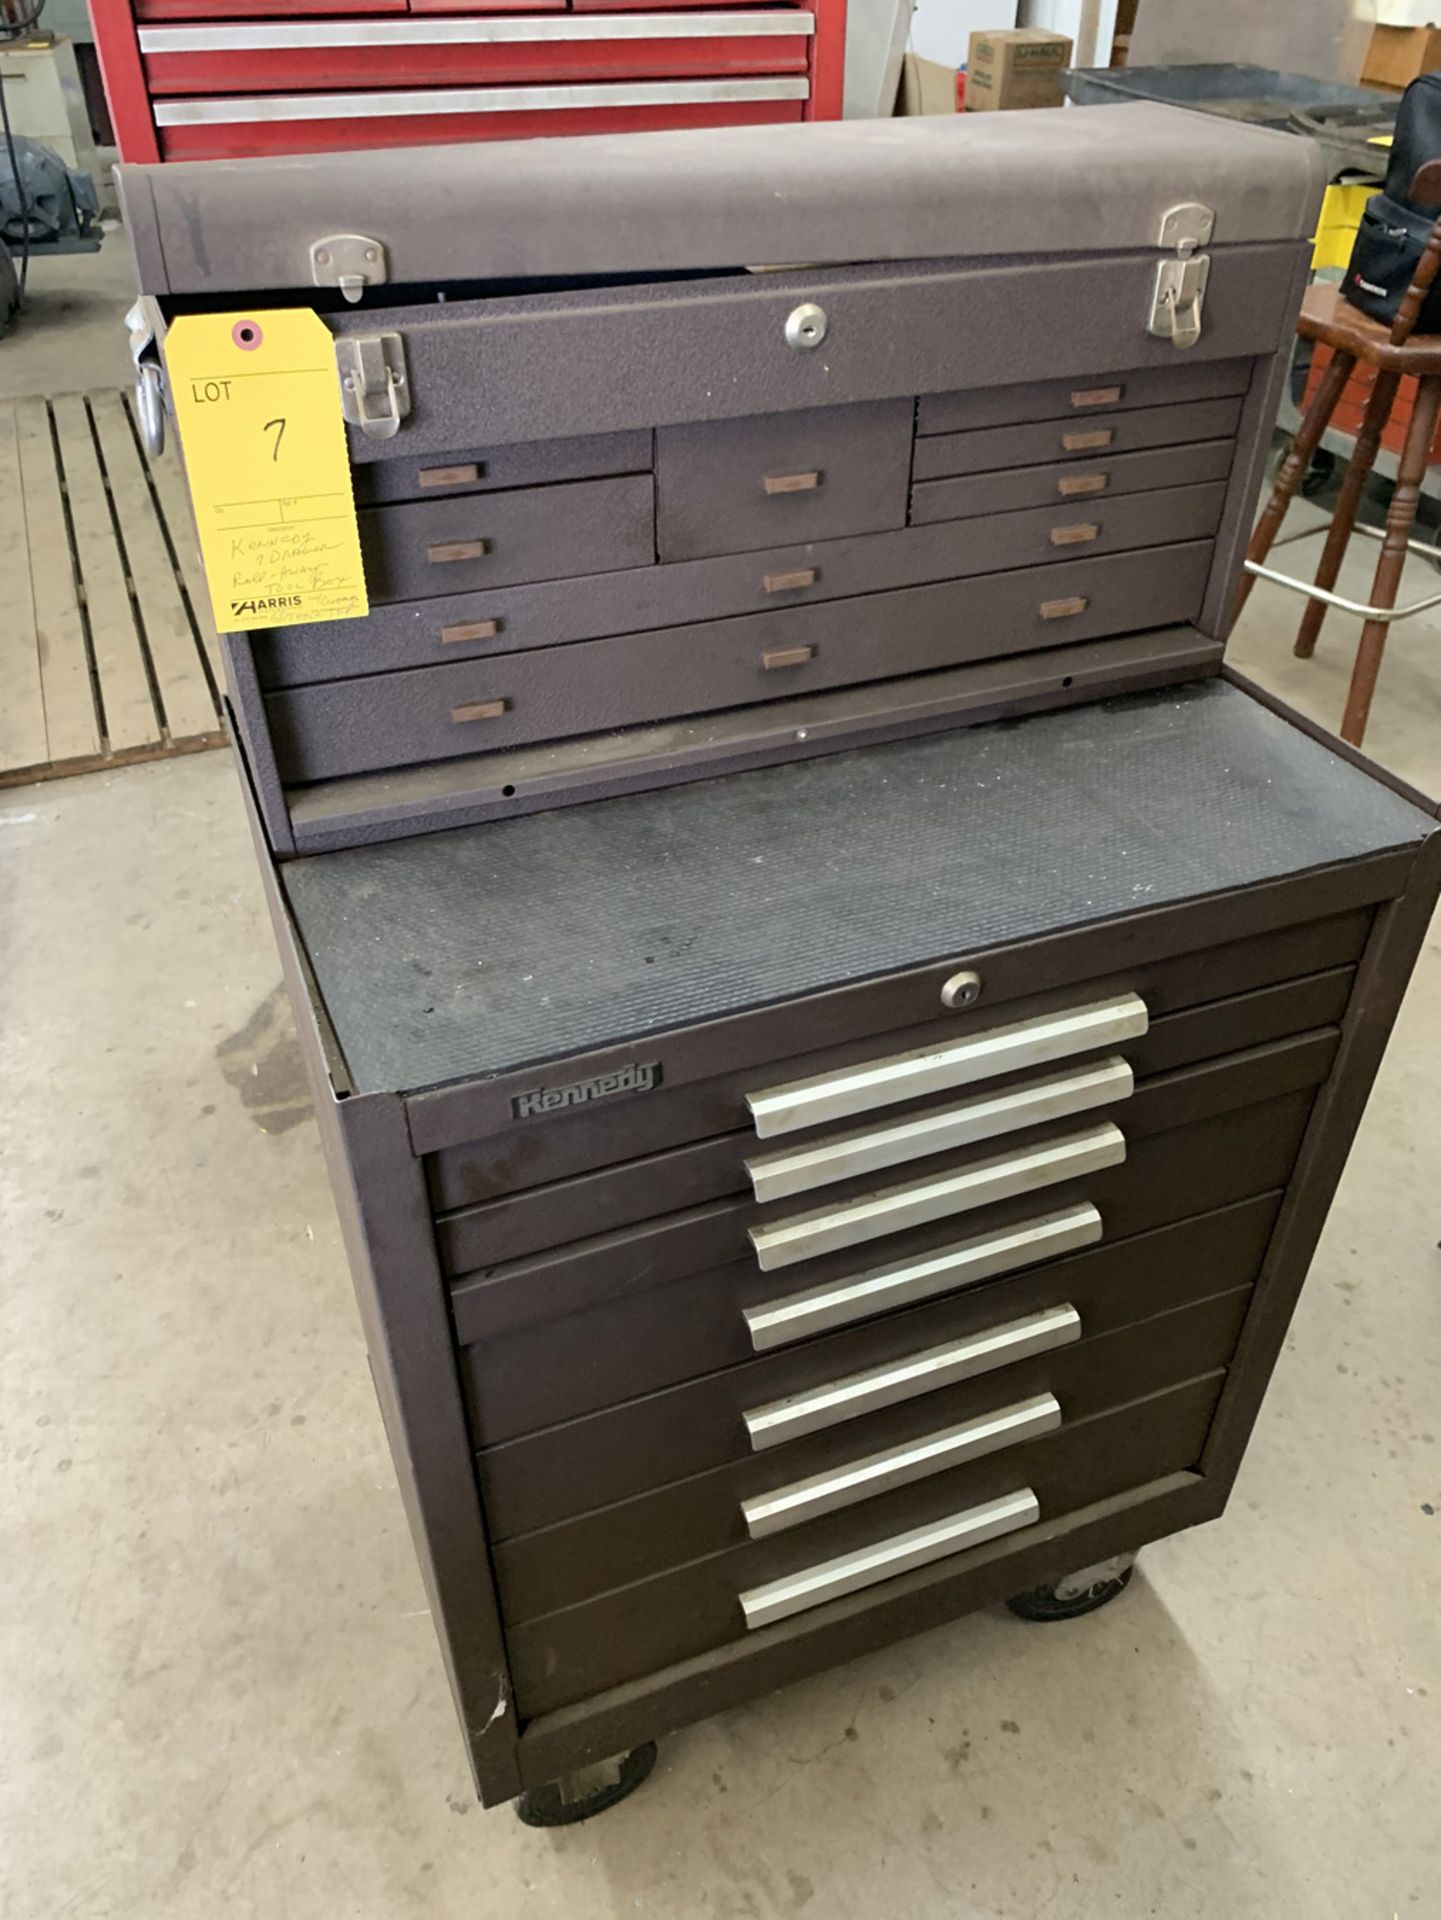 Lot: (1) Kennedy Roll-Away Tool Box, 7 Drawer with contents; (1) Kennedy Multi Drawer Tool Box